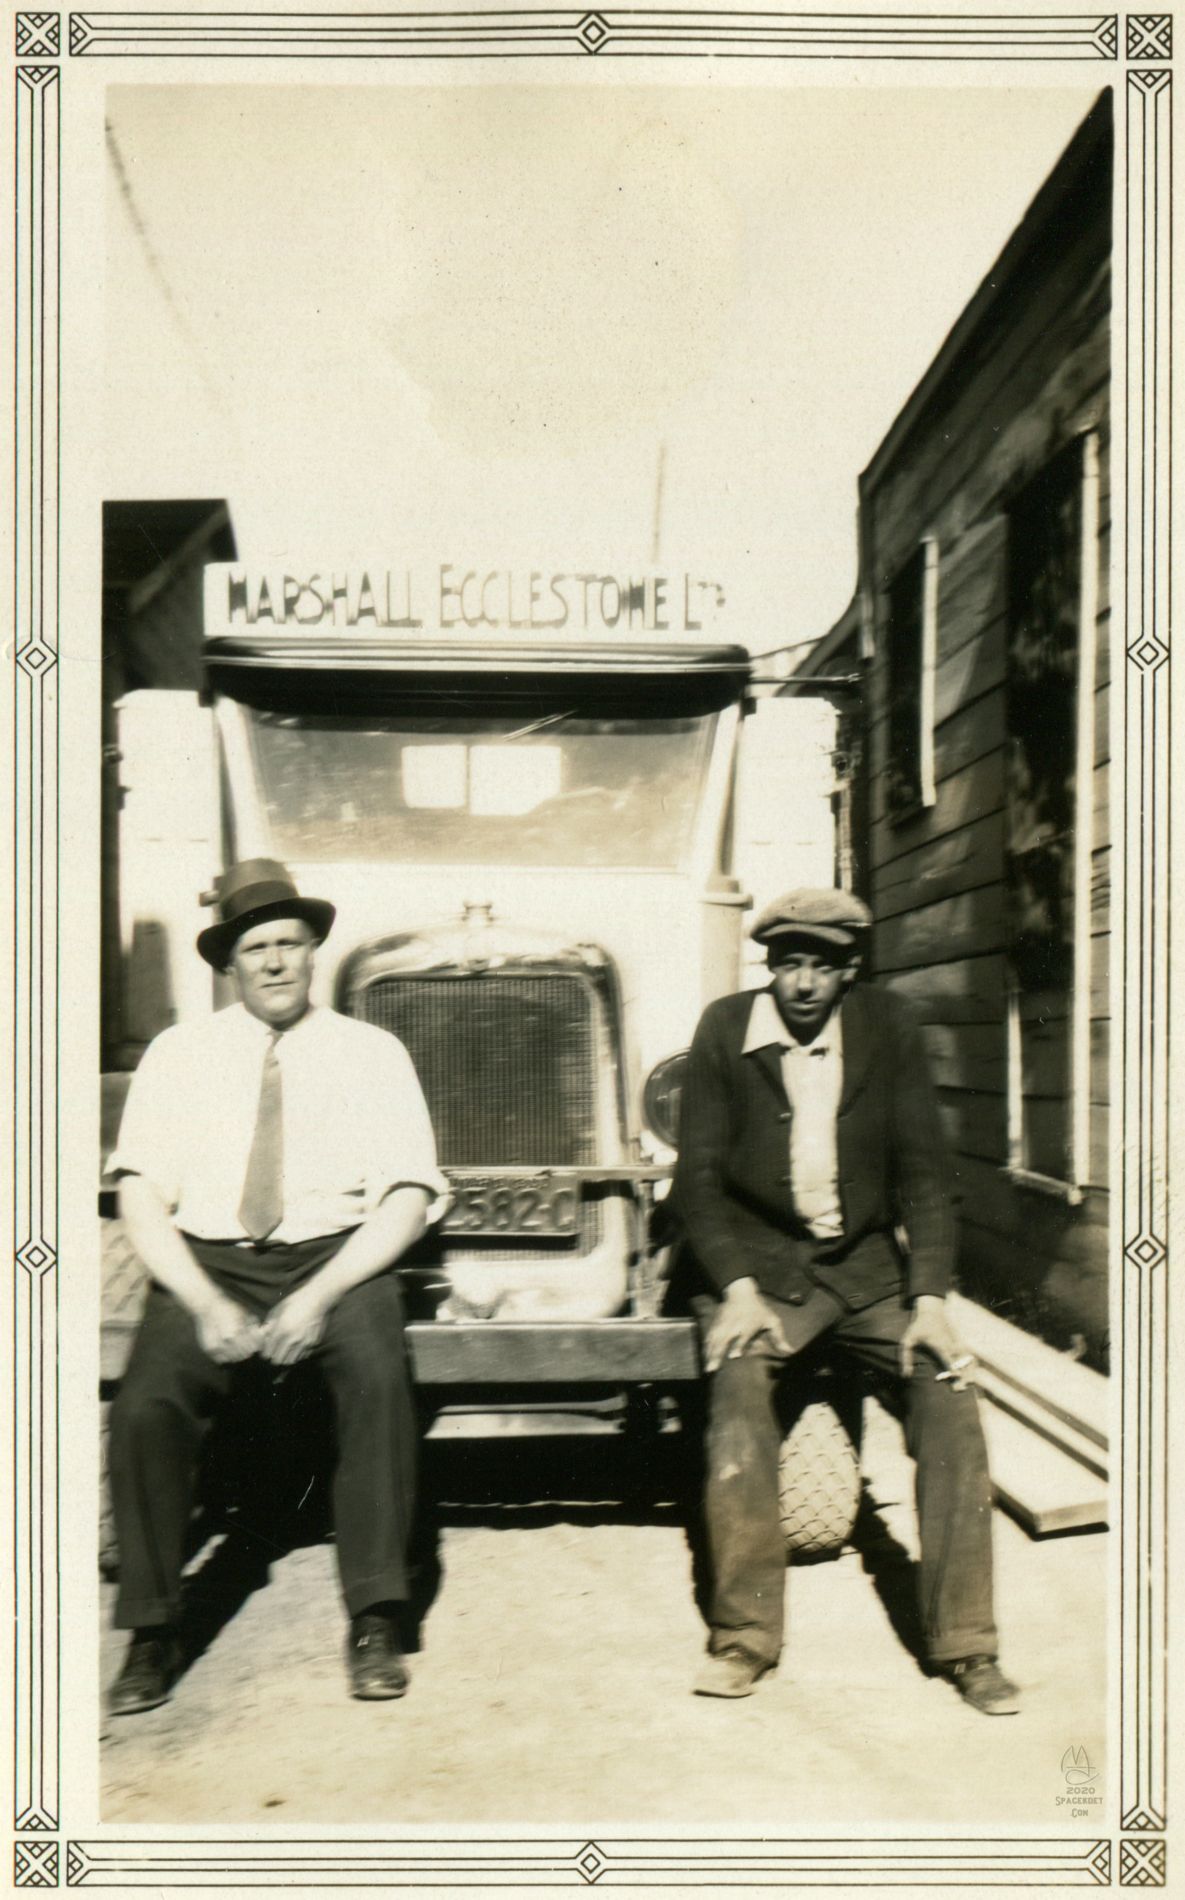 Grandpa (left) and presumably a co-worker sitting on the work truck.